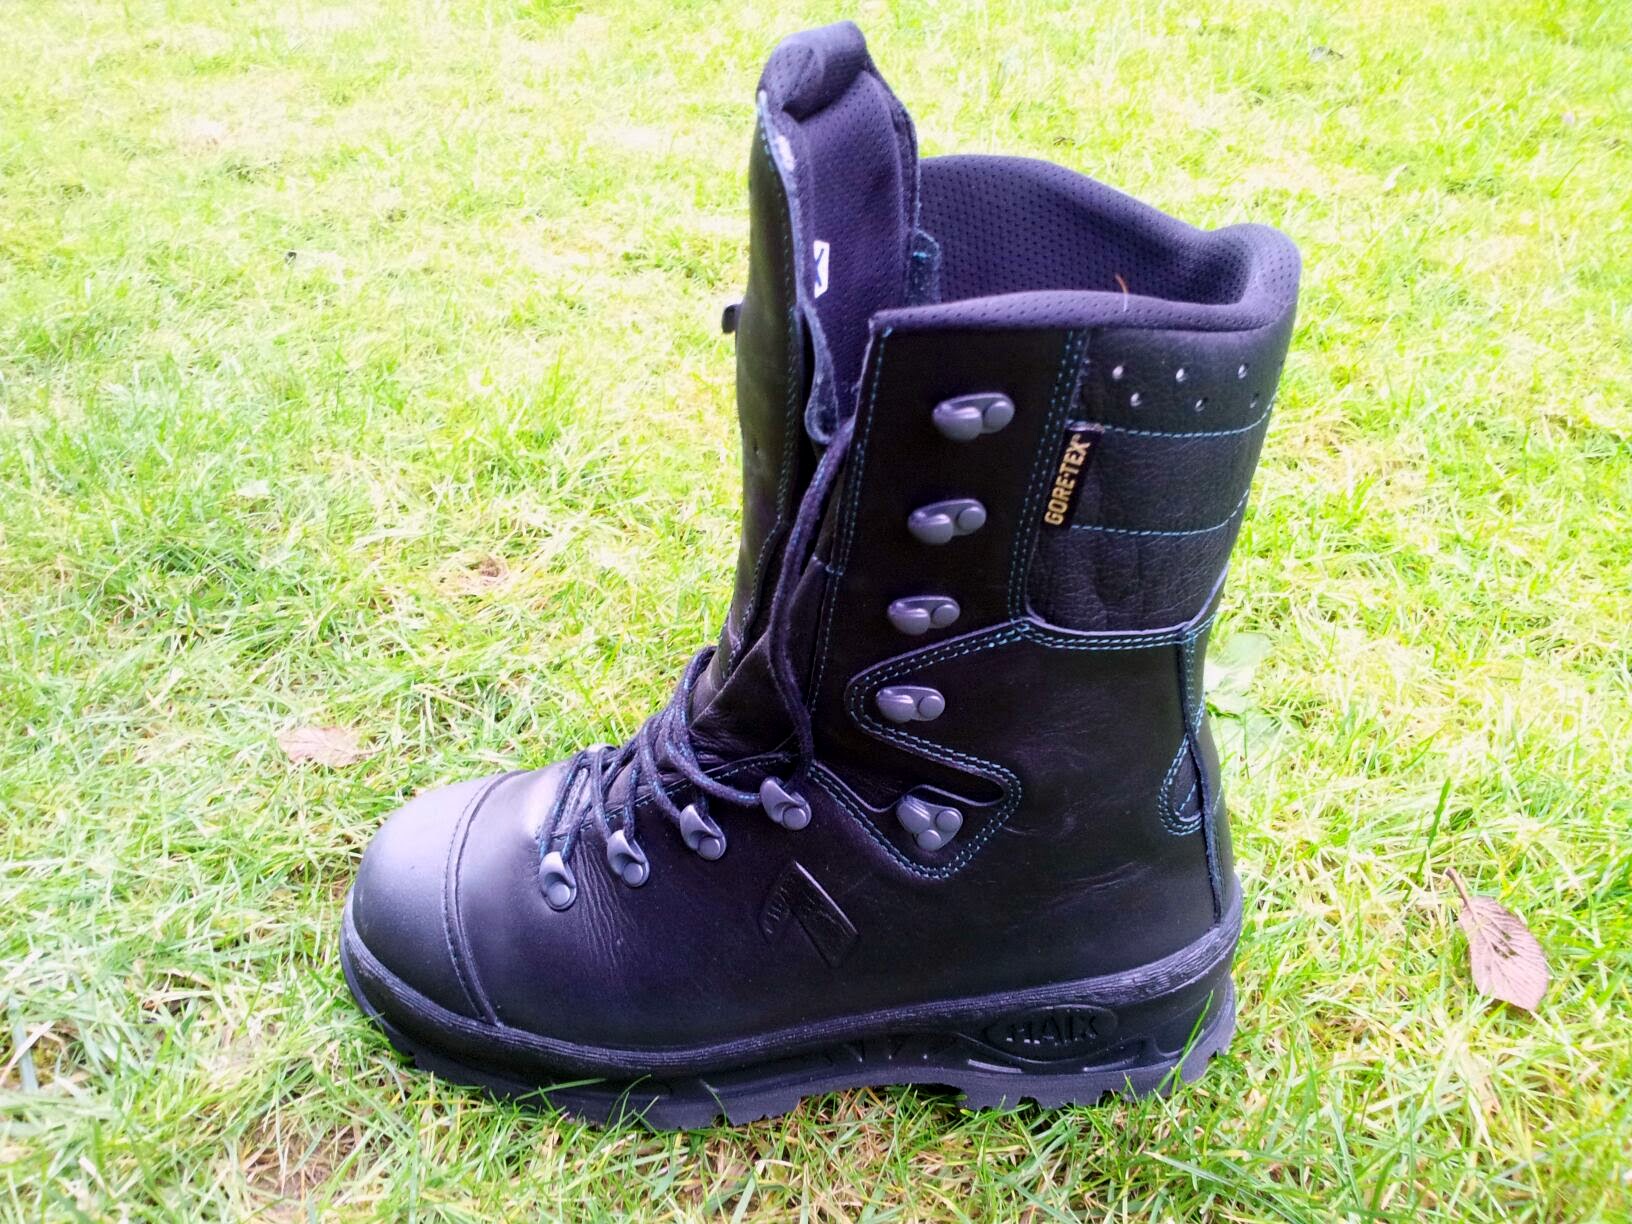 Lee & Anna's Blog: HAIX Protector Pro Boots